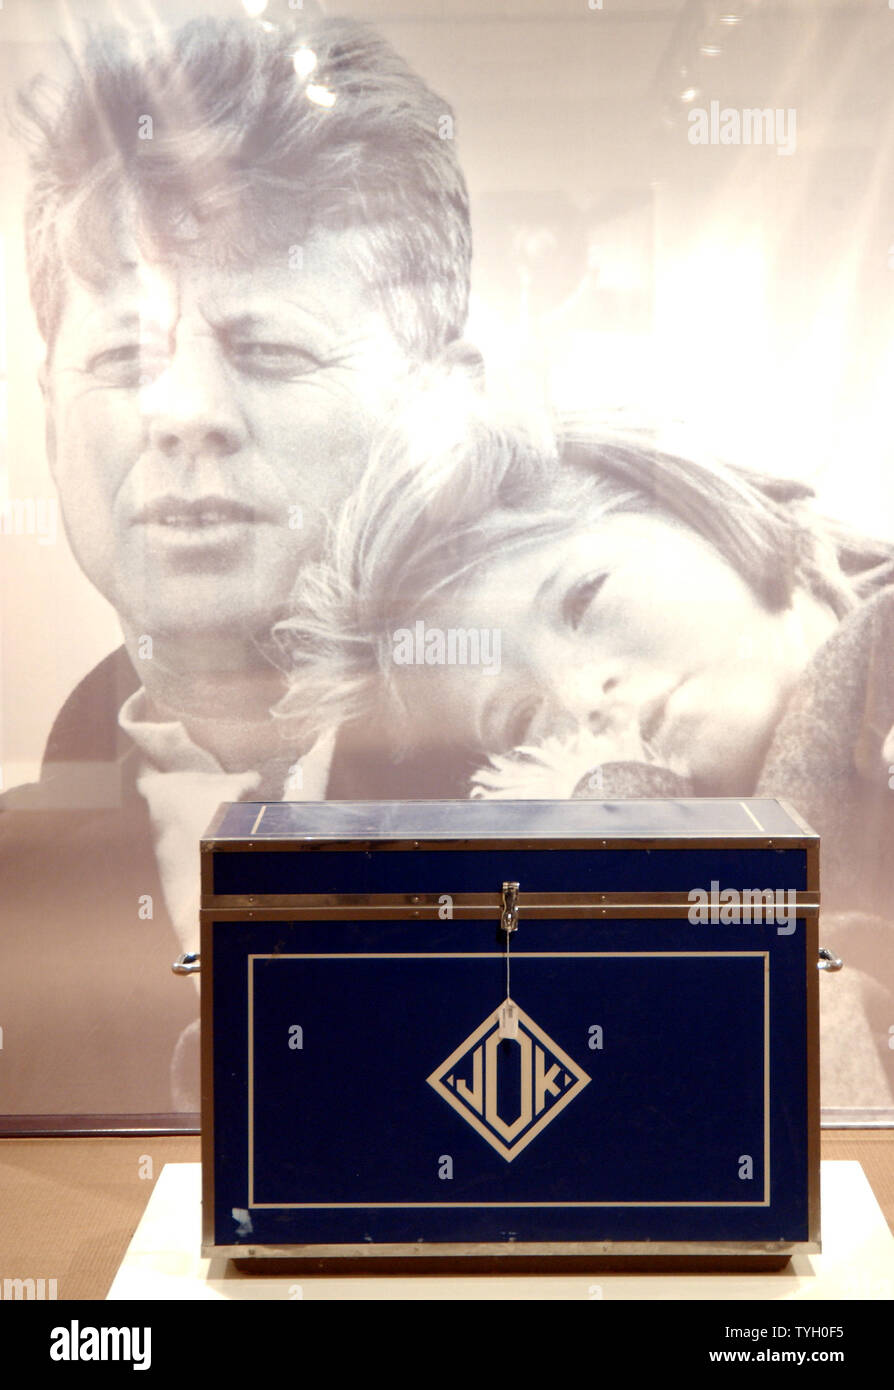 A blue acrylic tack trunk with white monogram JOK used by Mrs. Kennedy Onassis will be auctioned along with other items from the homes belonging to the family of President  Kennedy on 2/15 to 2/17//05 at Sotheby's New York galleries.  (UPI Photo/Ezio Petersen) Stock Photo